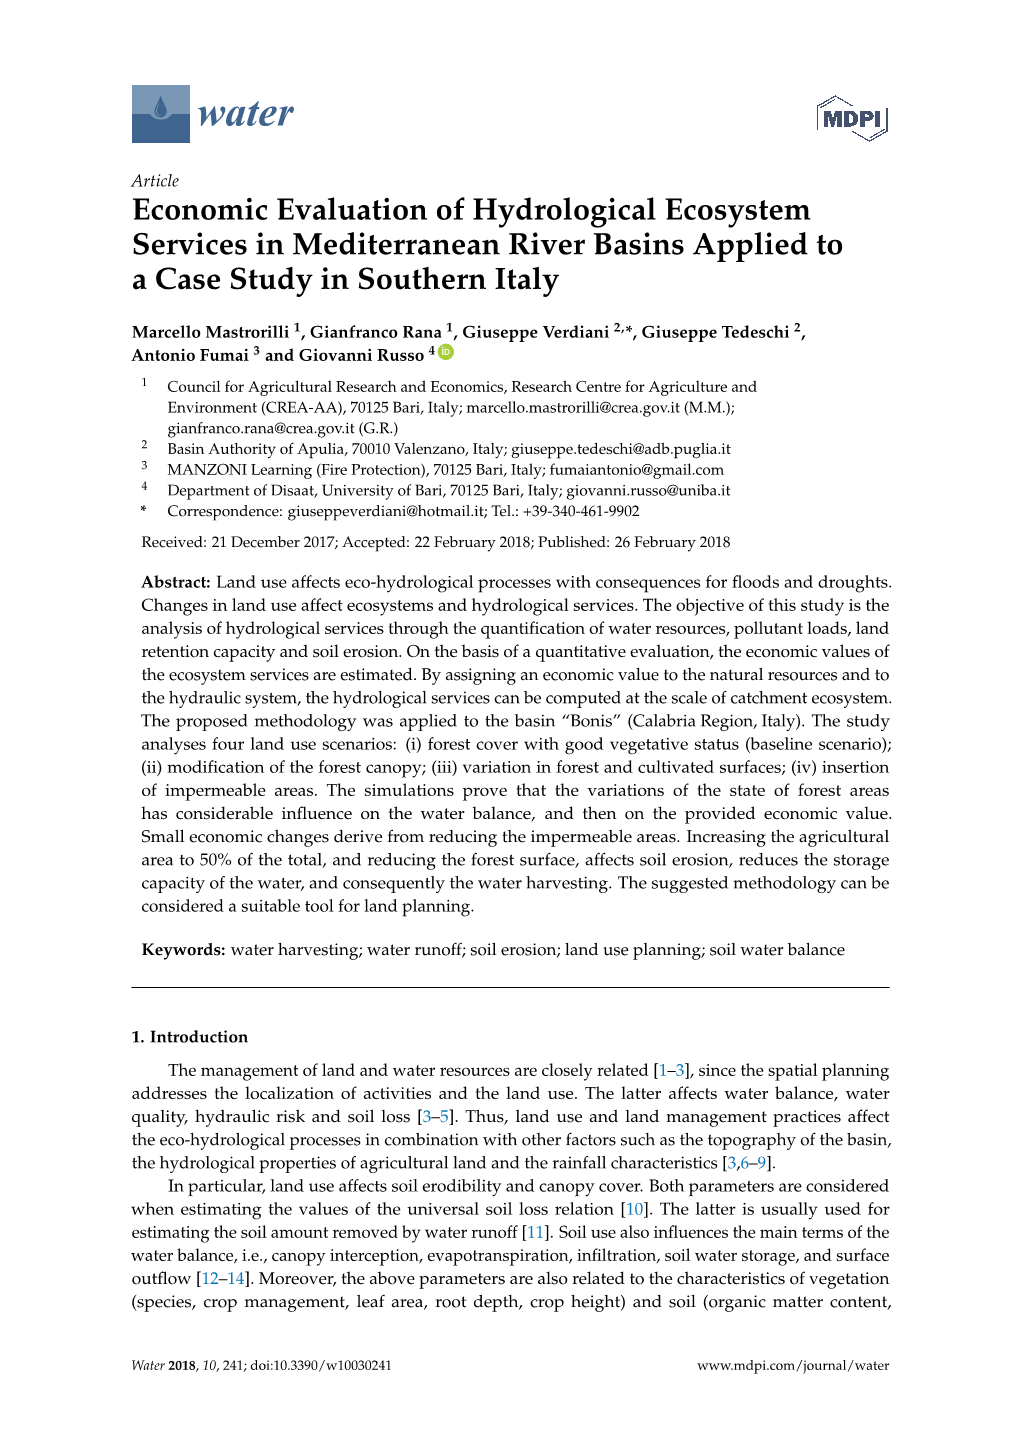 Economic Evaluation of Hydrological Ecosystem Services in Mediterranean River Basins Applied to a Case Study in Southern Italy